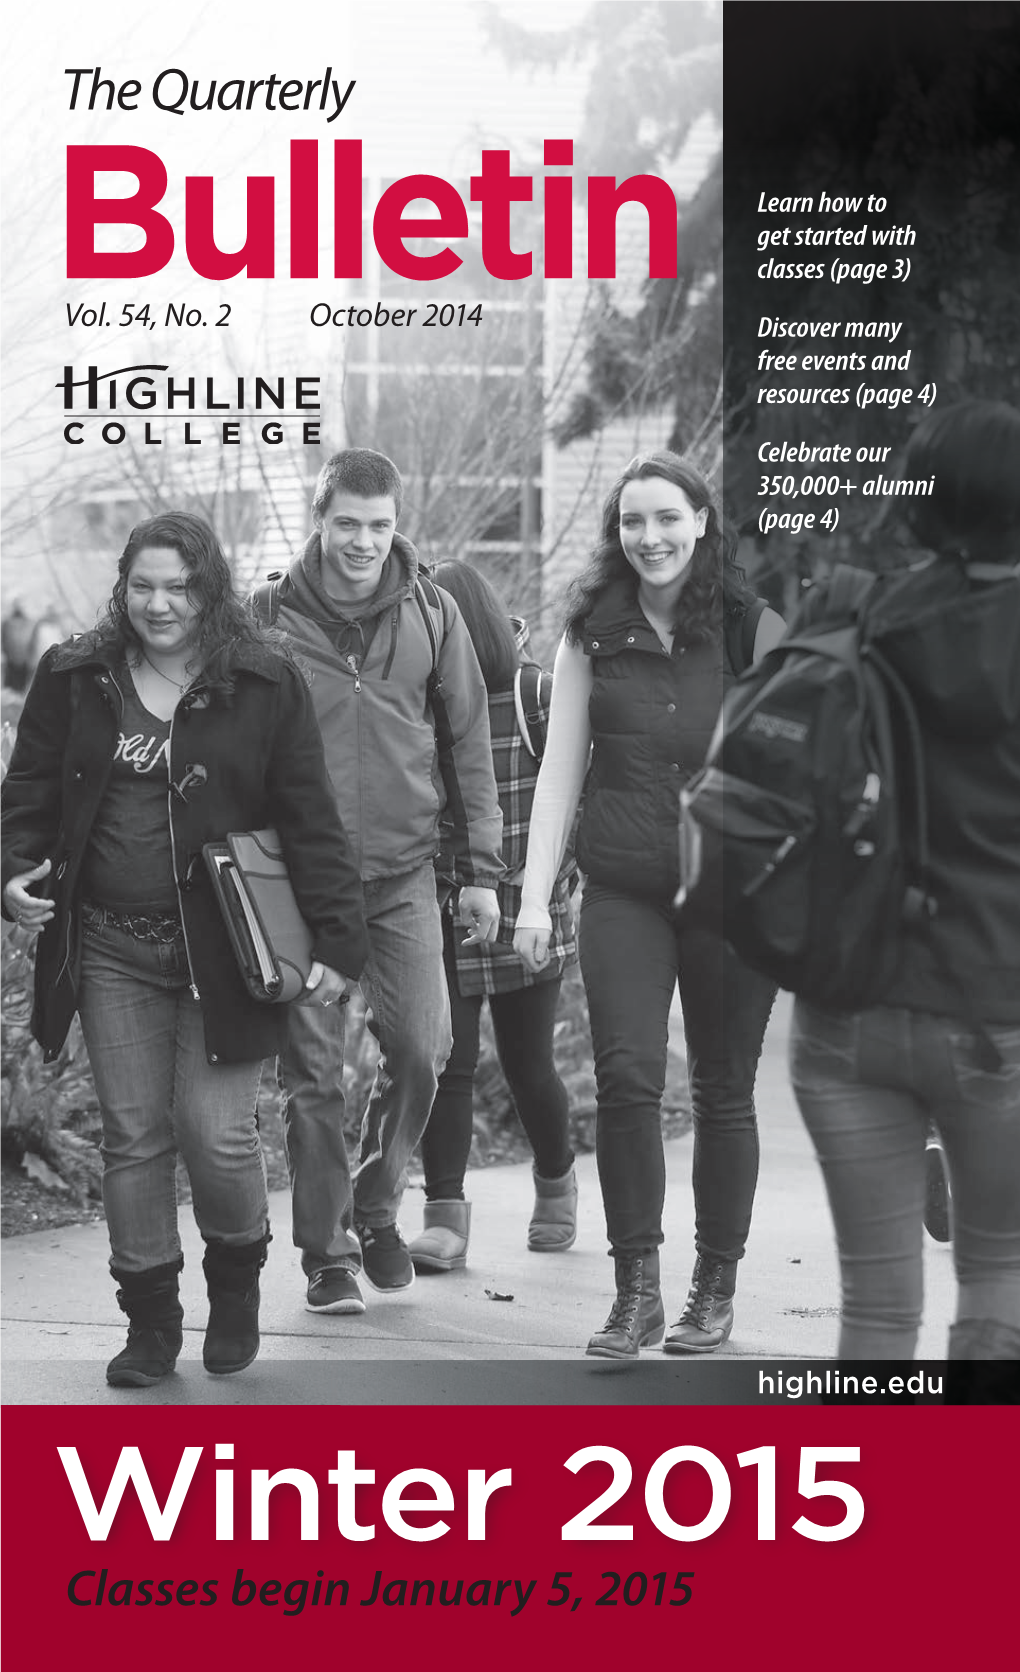 Winter 2015 Classes Begin January 5, 2015 Sign up for Winter Classes Now We Are Here to Help You Get Started at Highline